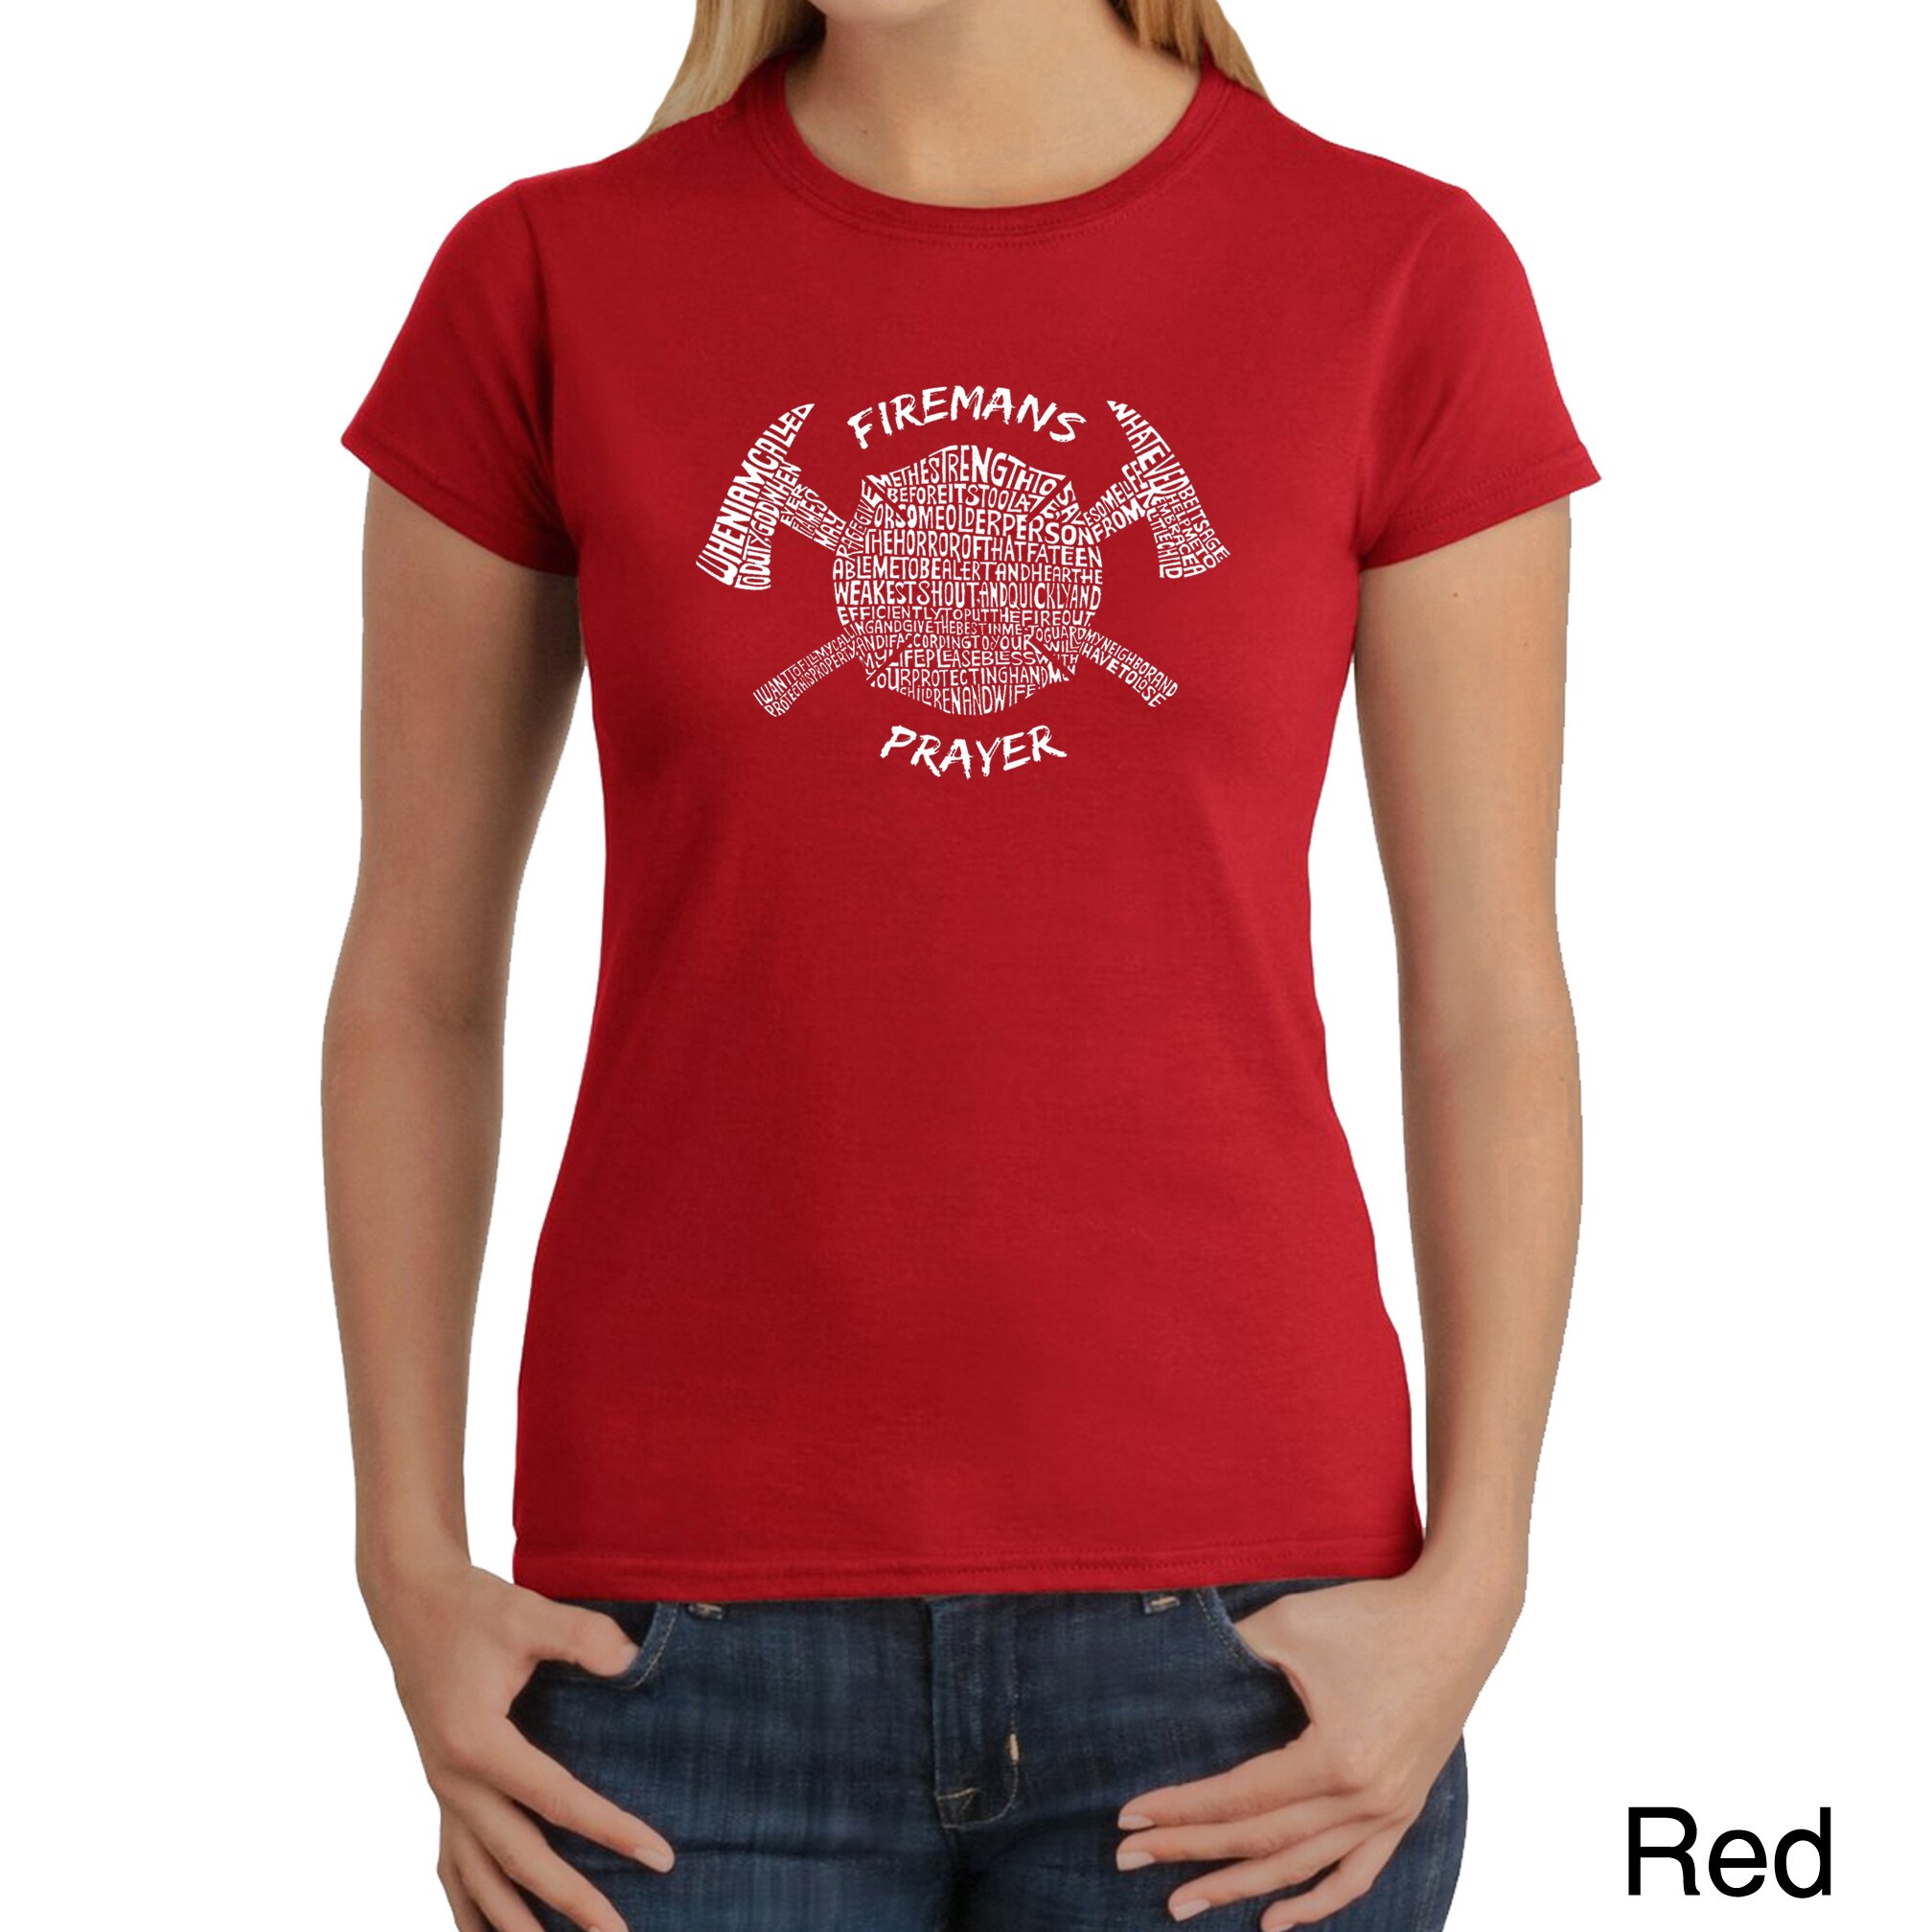 Los Angeles Pop Art Womens Firemans Prayer T shirt (100 percent cotton Machine washableAll measurements are approximate and may vary by size. )